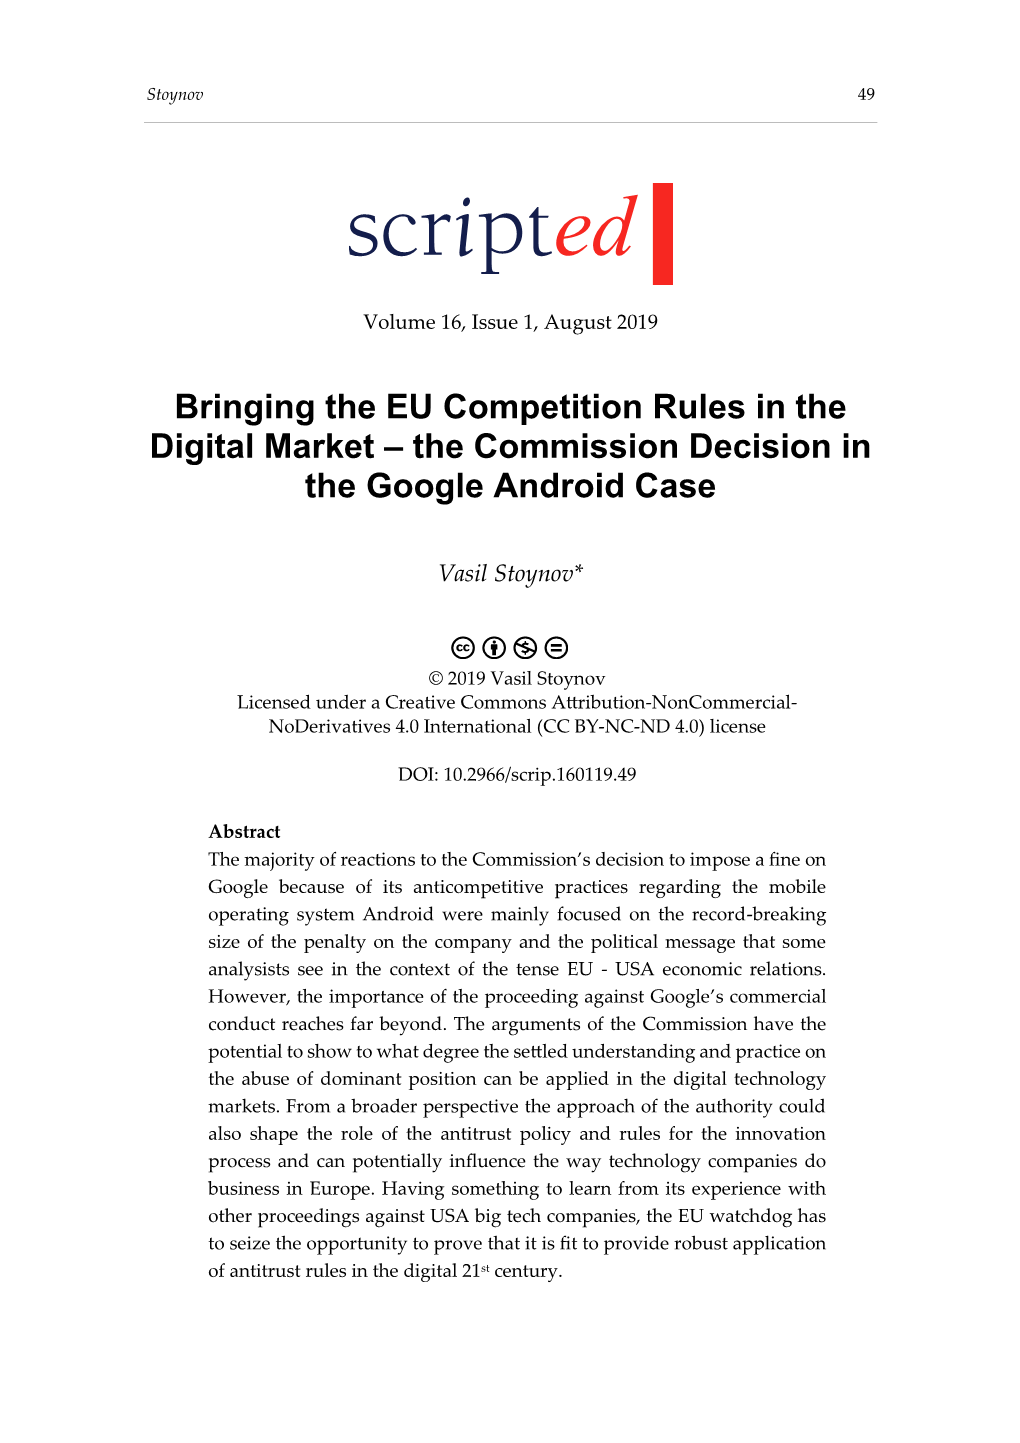 Bringing the EU Competition Rules in the Digital Market – the Commission Decision in the Google Android Case